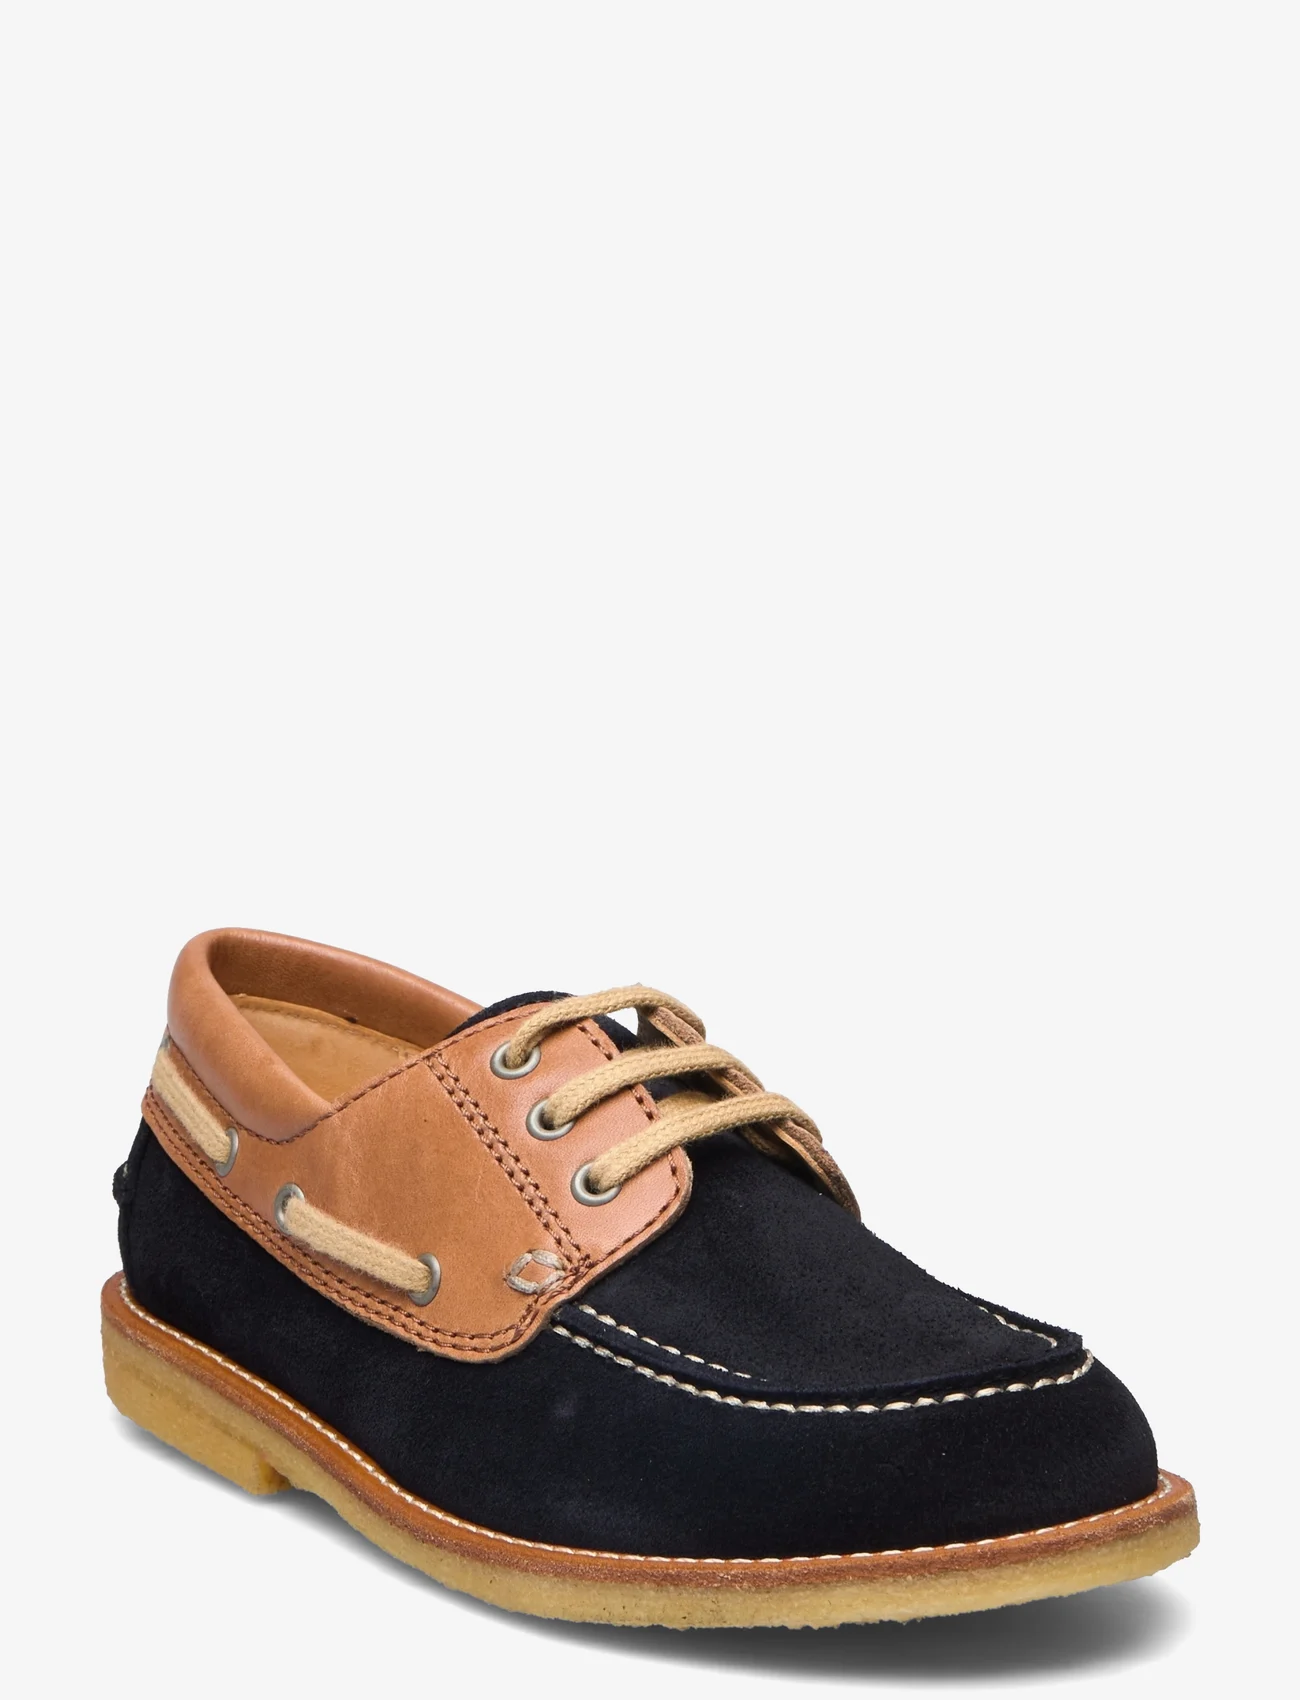 ANGULUS - Shoes - flat - with lace - vaikams - 2215/1789 navy/cognac - 0